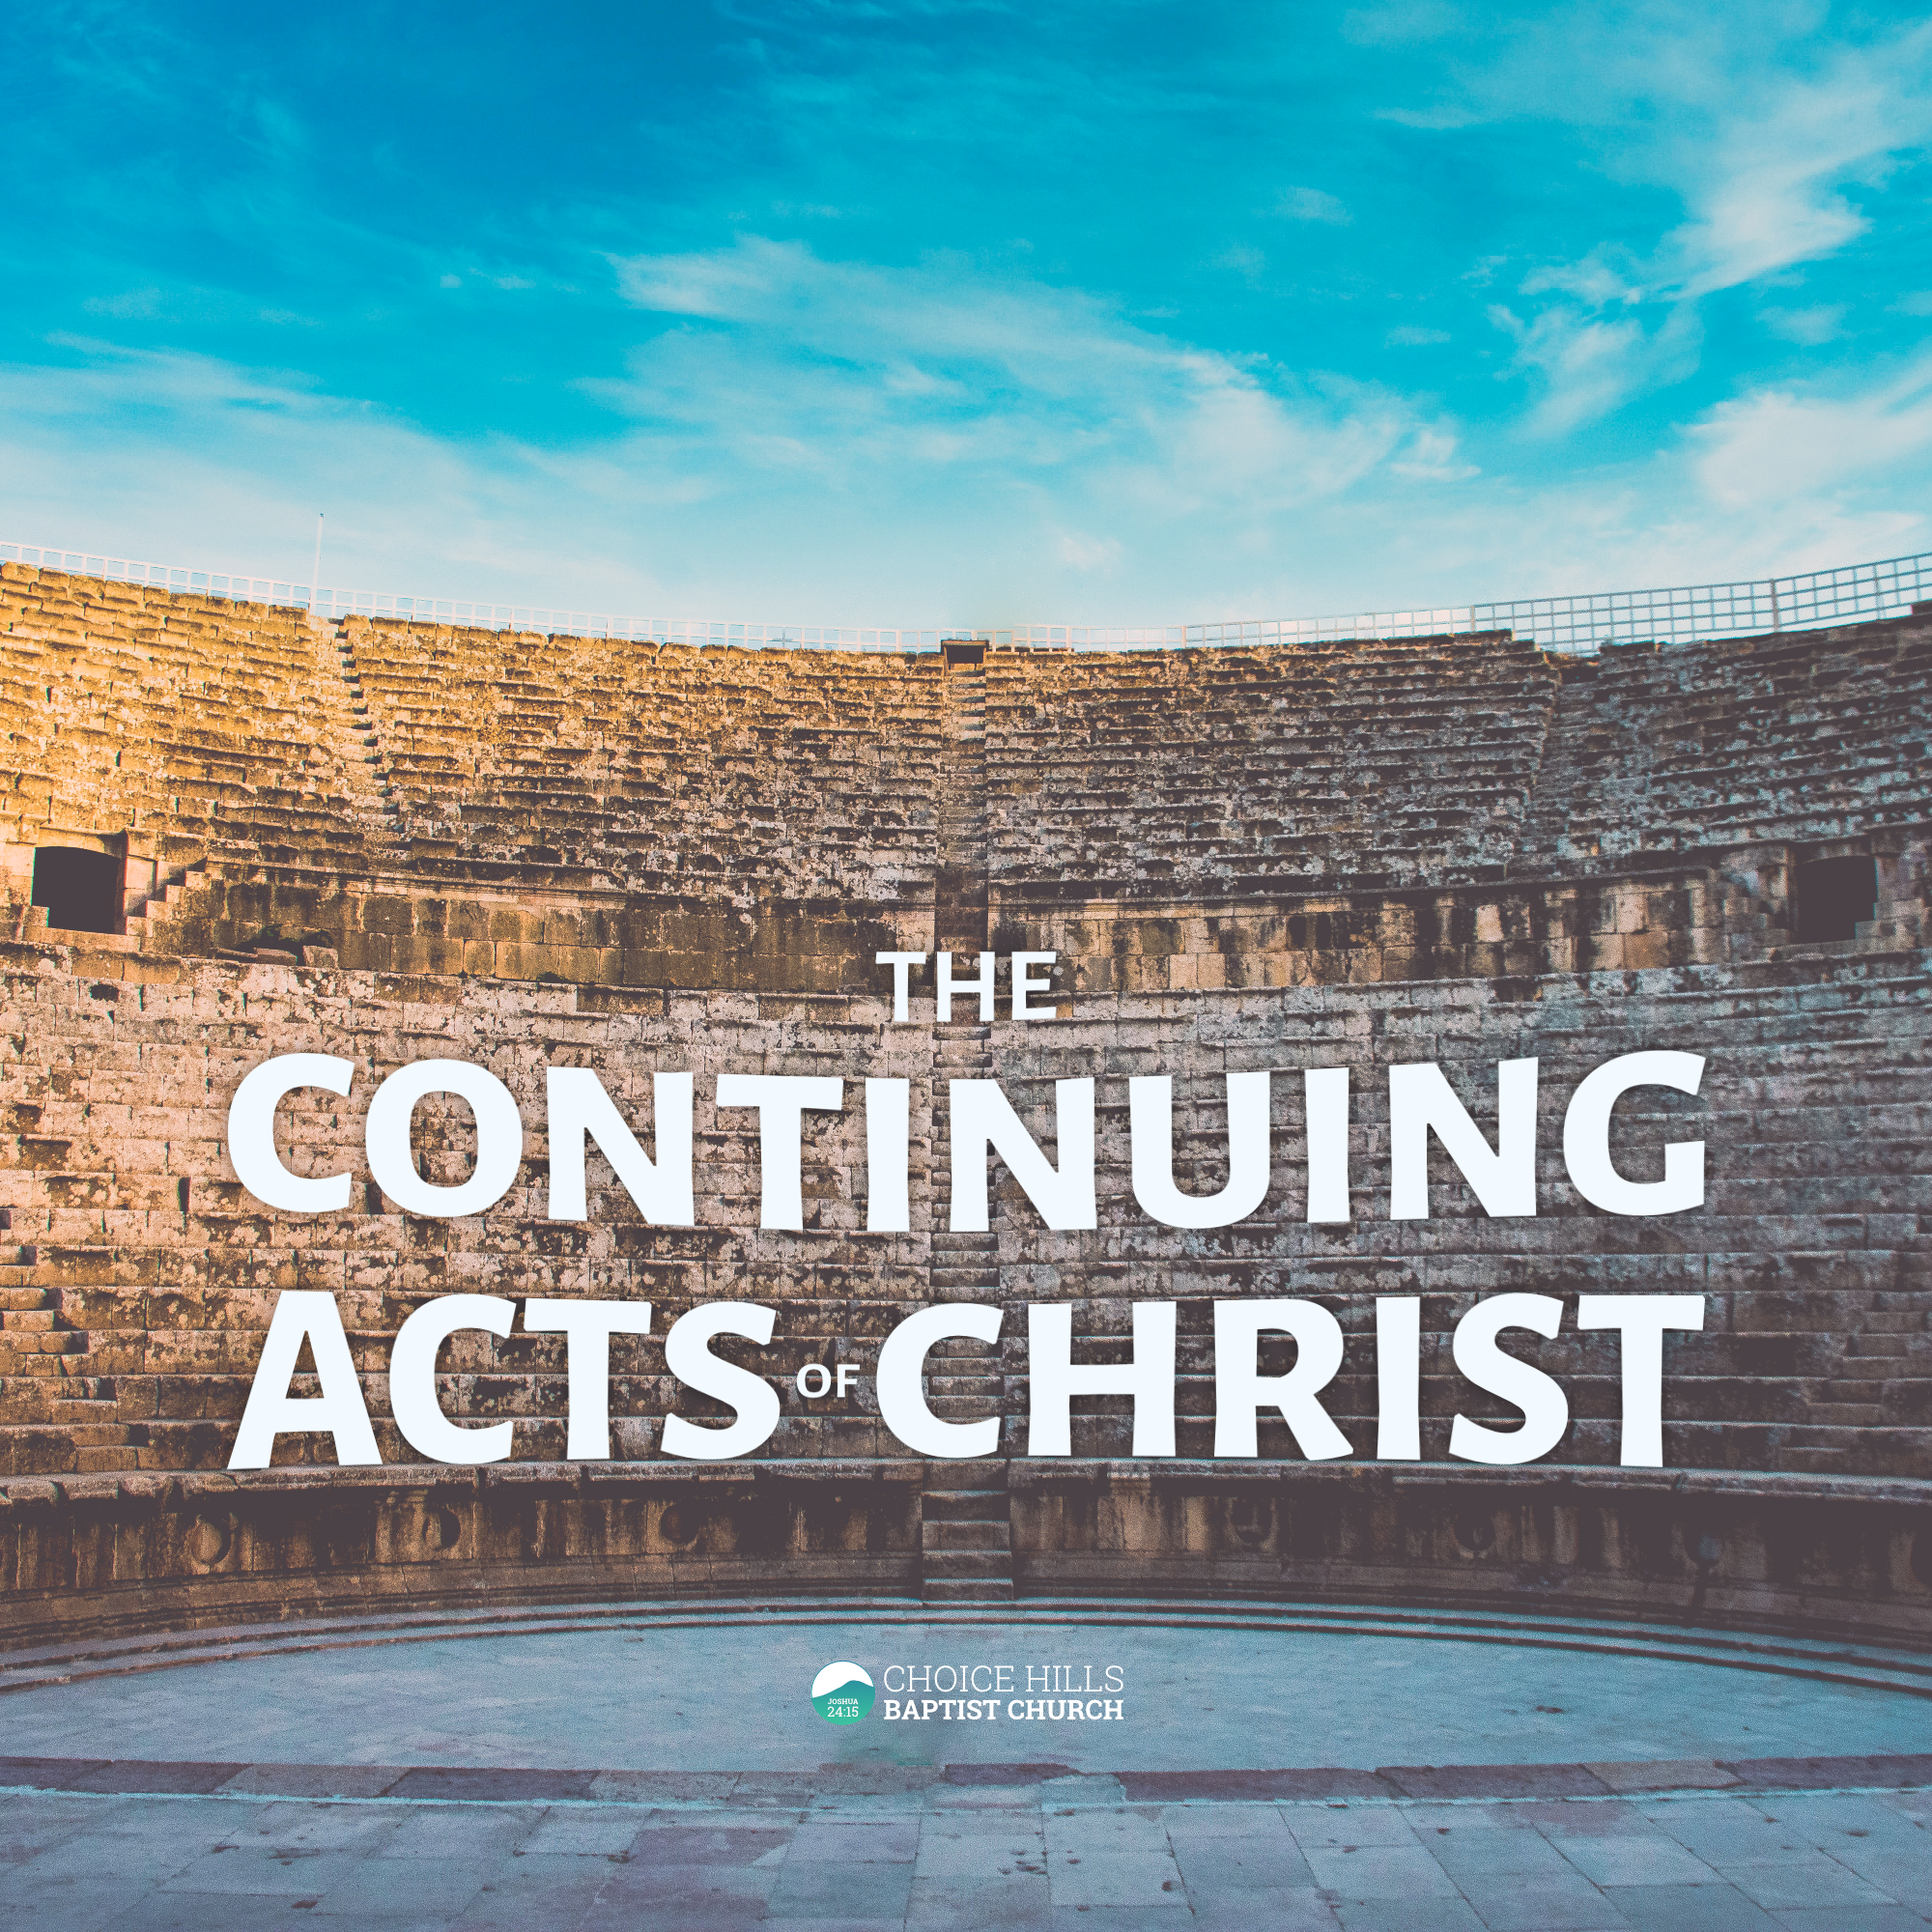 The Twelfth Apostle: The Continuing Acts of Christ—A Study of the Book of Acts